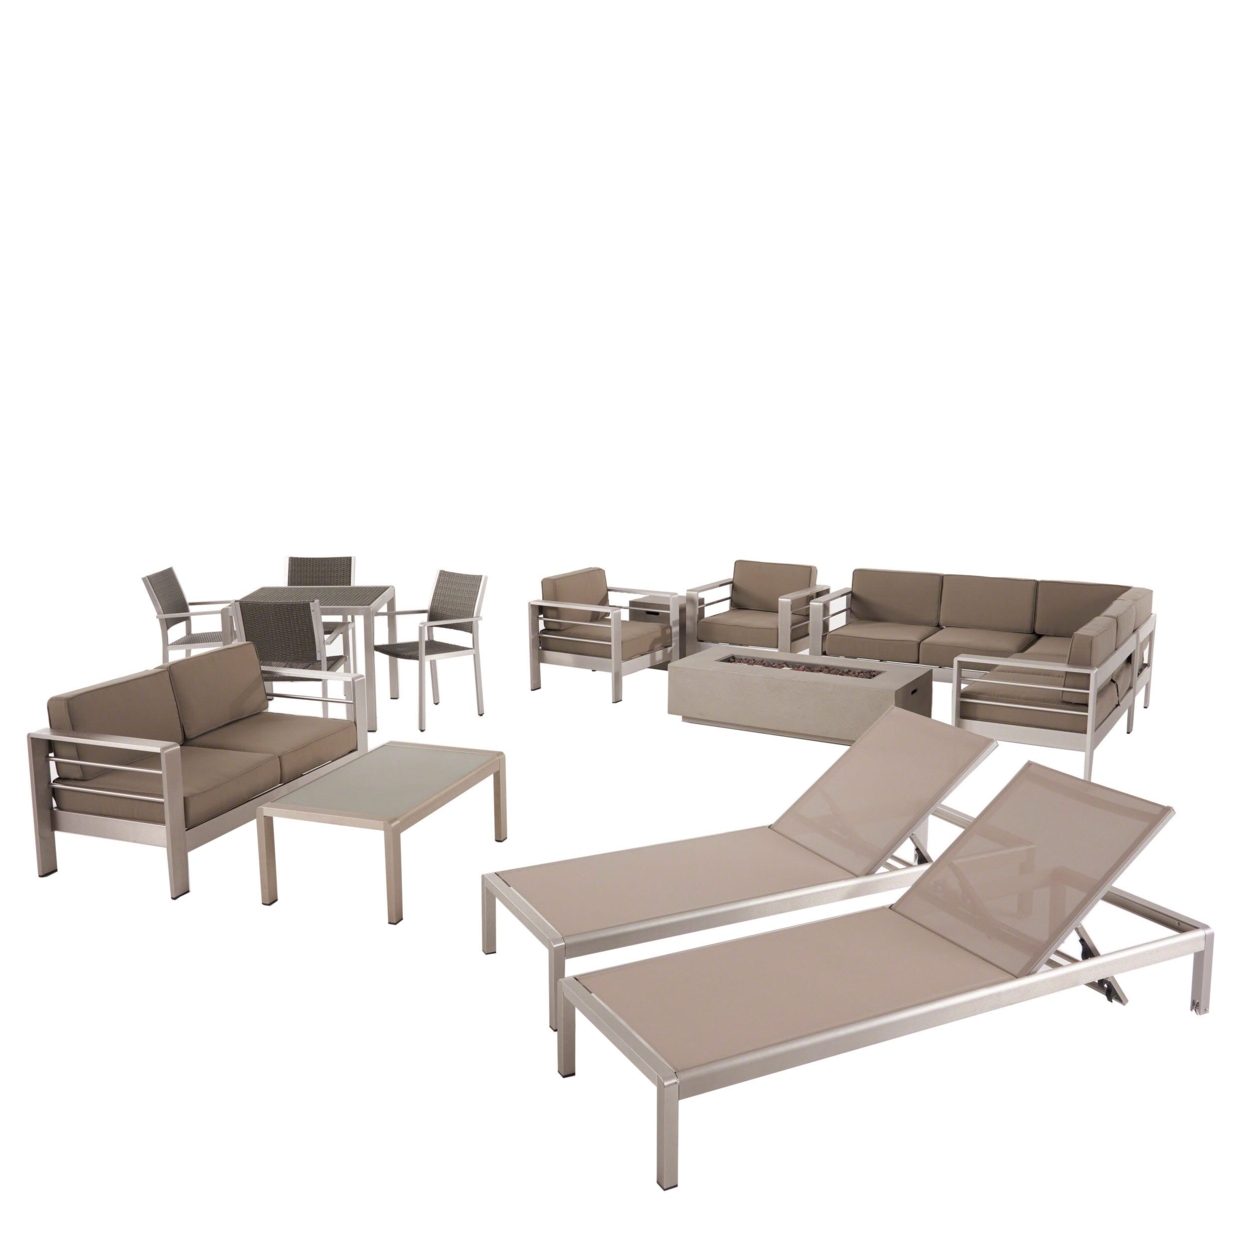 Cherie Outdoor 16 Piece Aluminum Estate Collection With Cushions And Fire Pit - Dark Gray